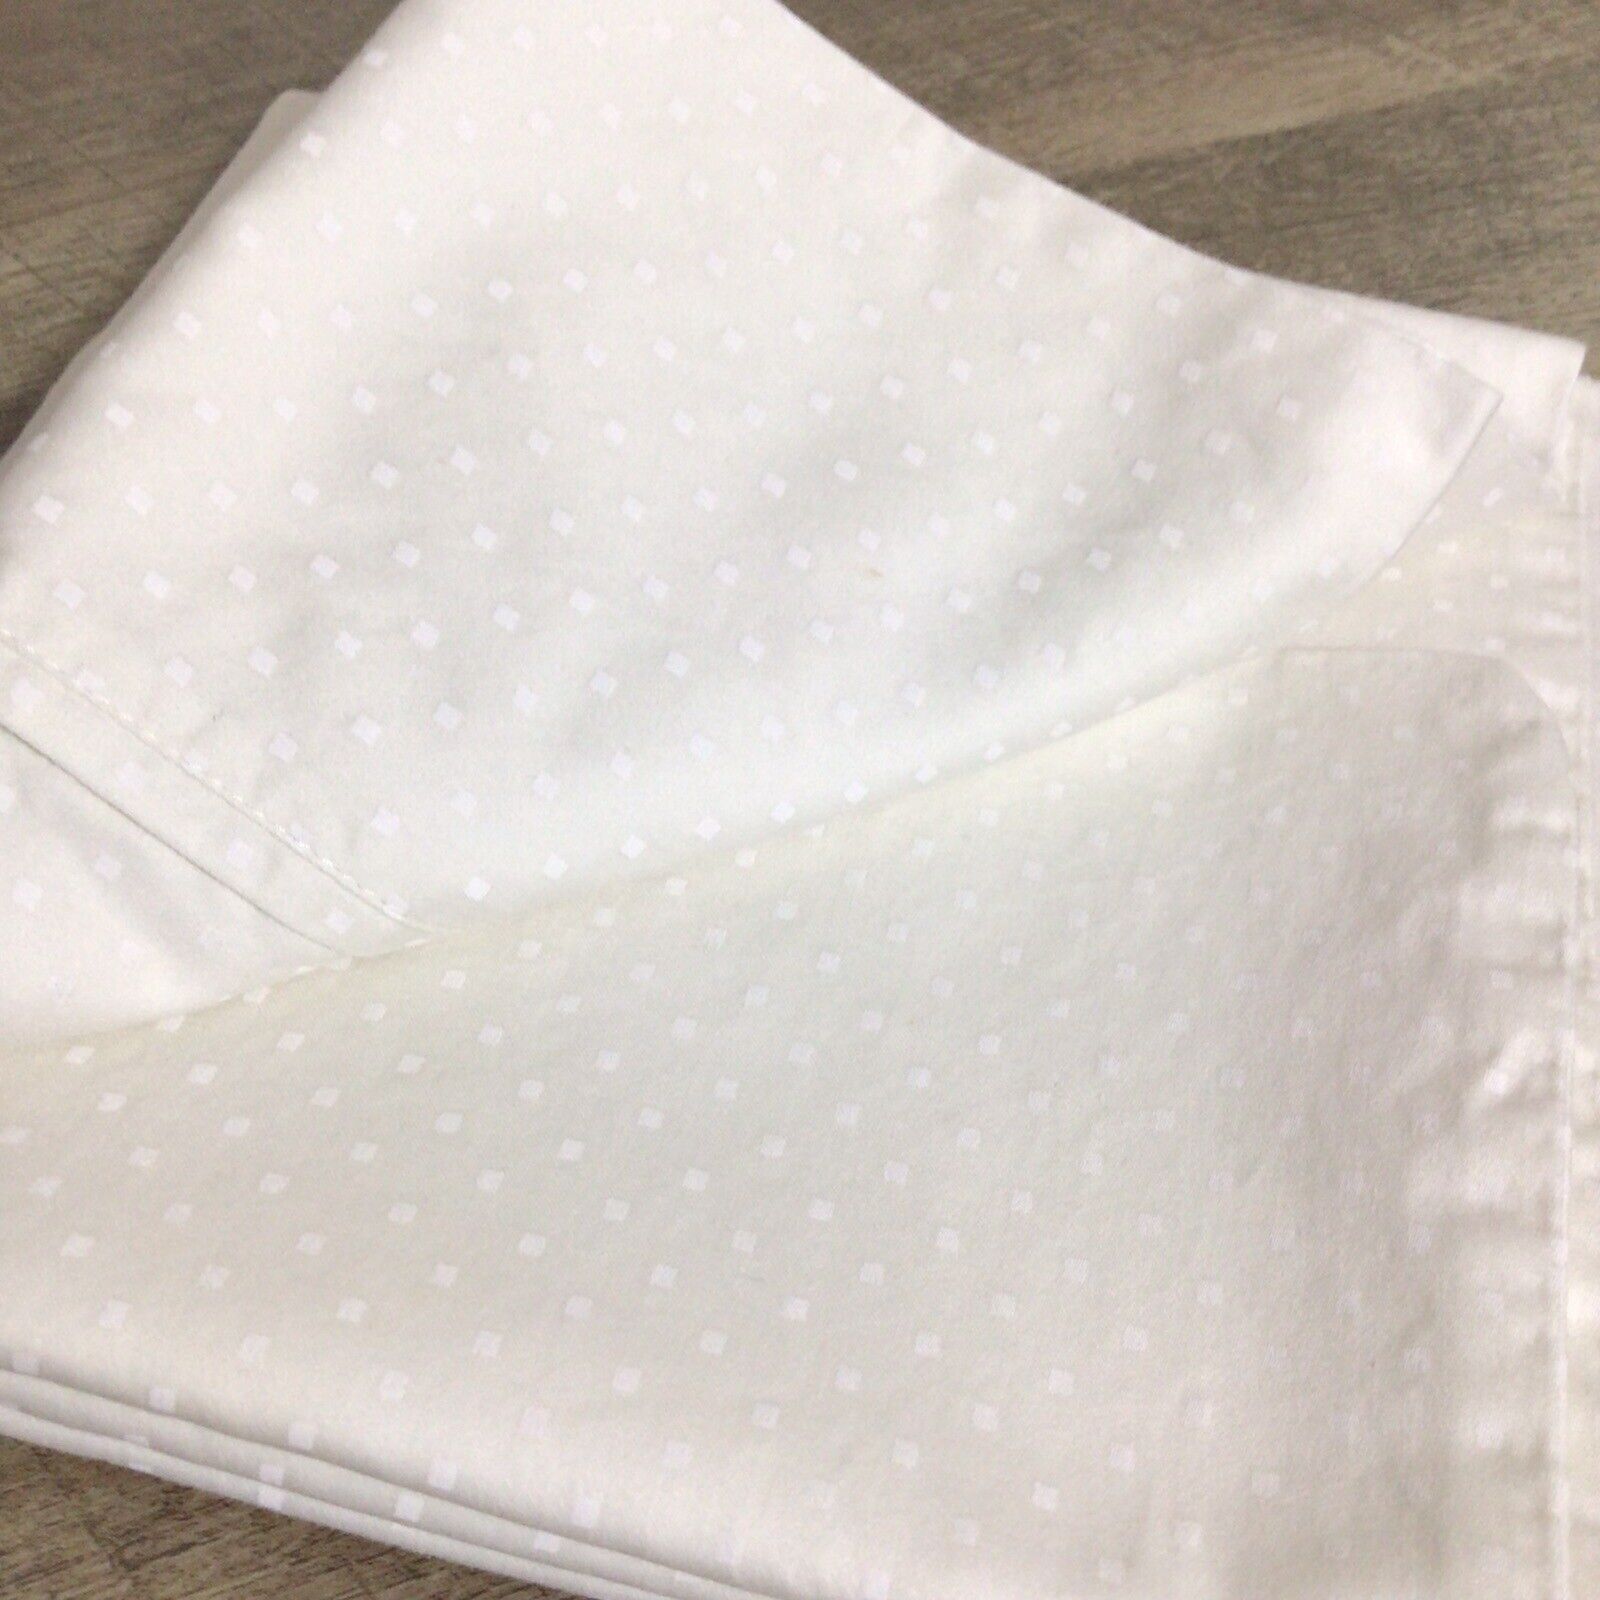 Charisma One Standard Pillowcase Dots Made in India